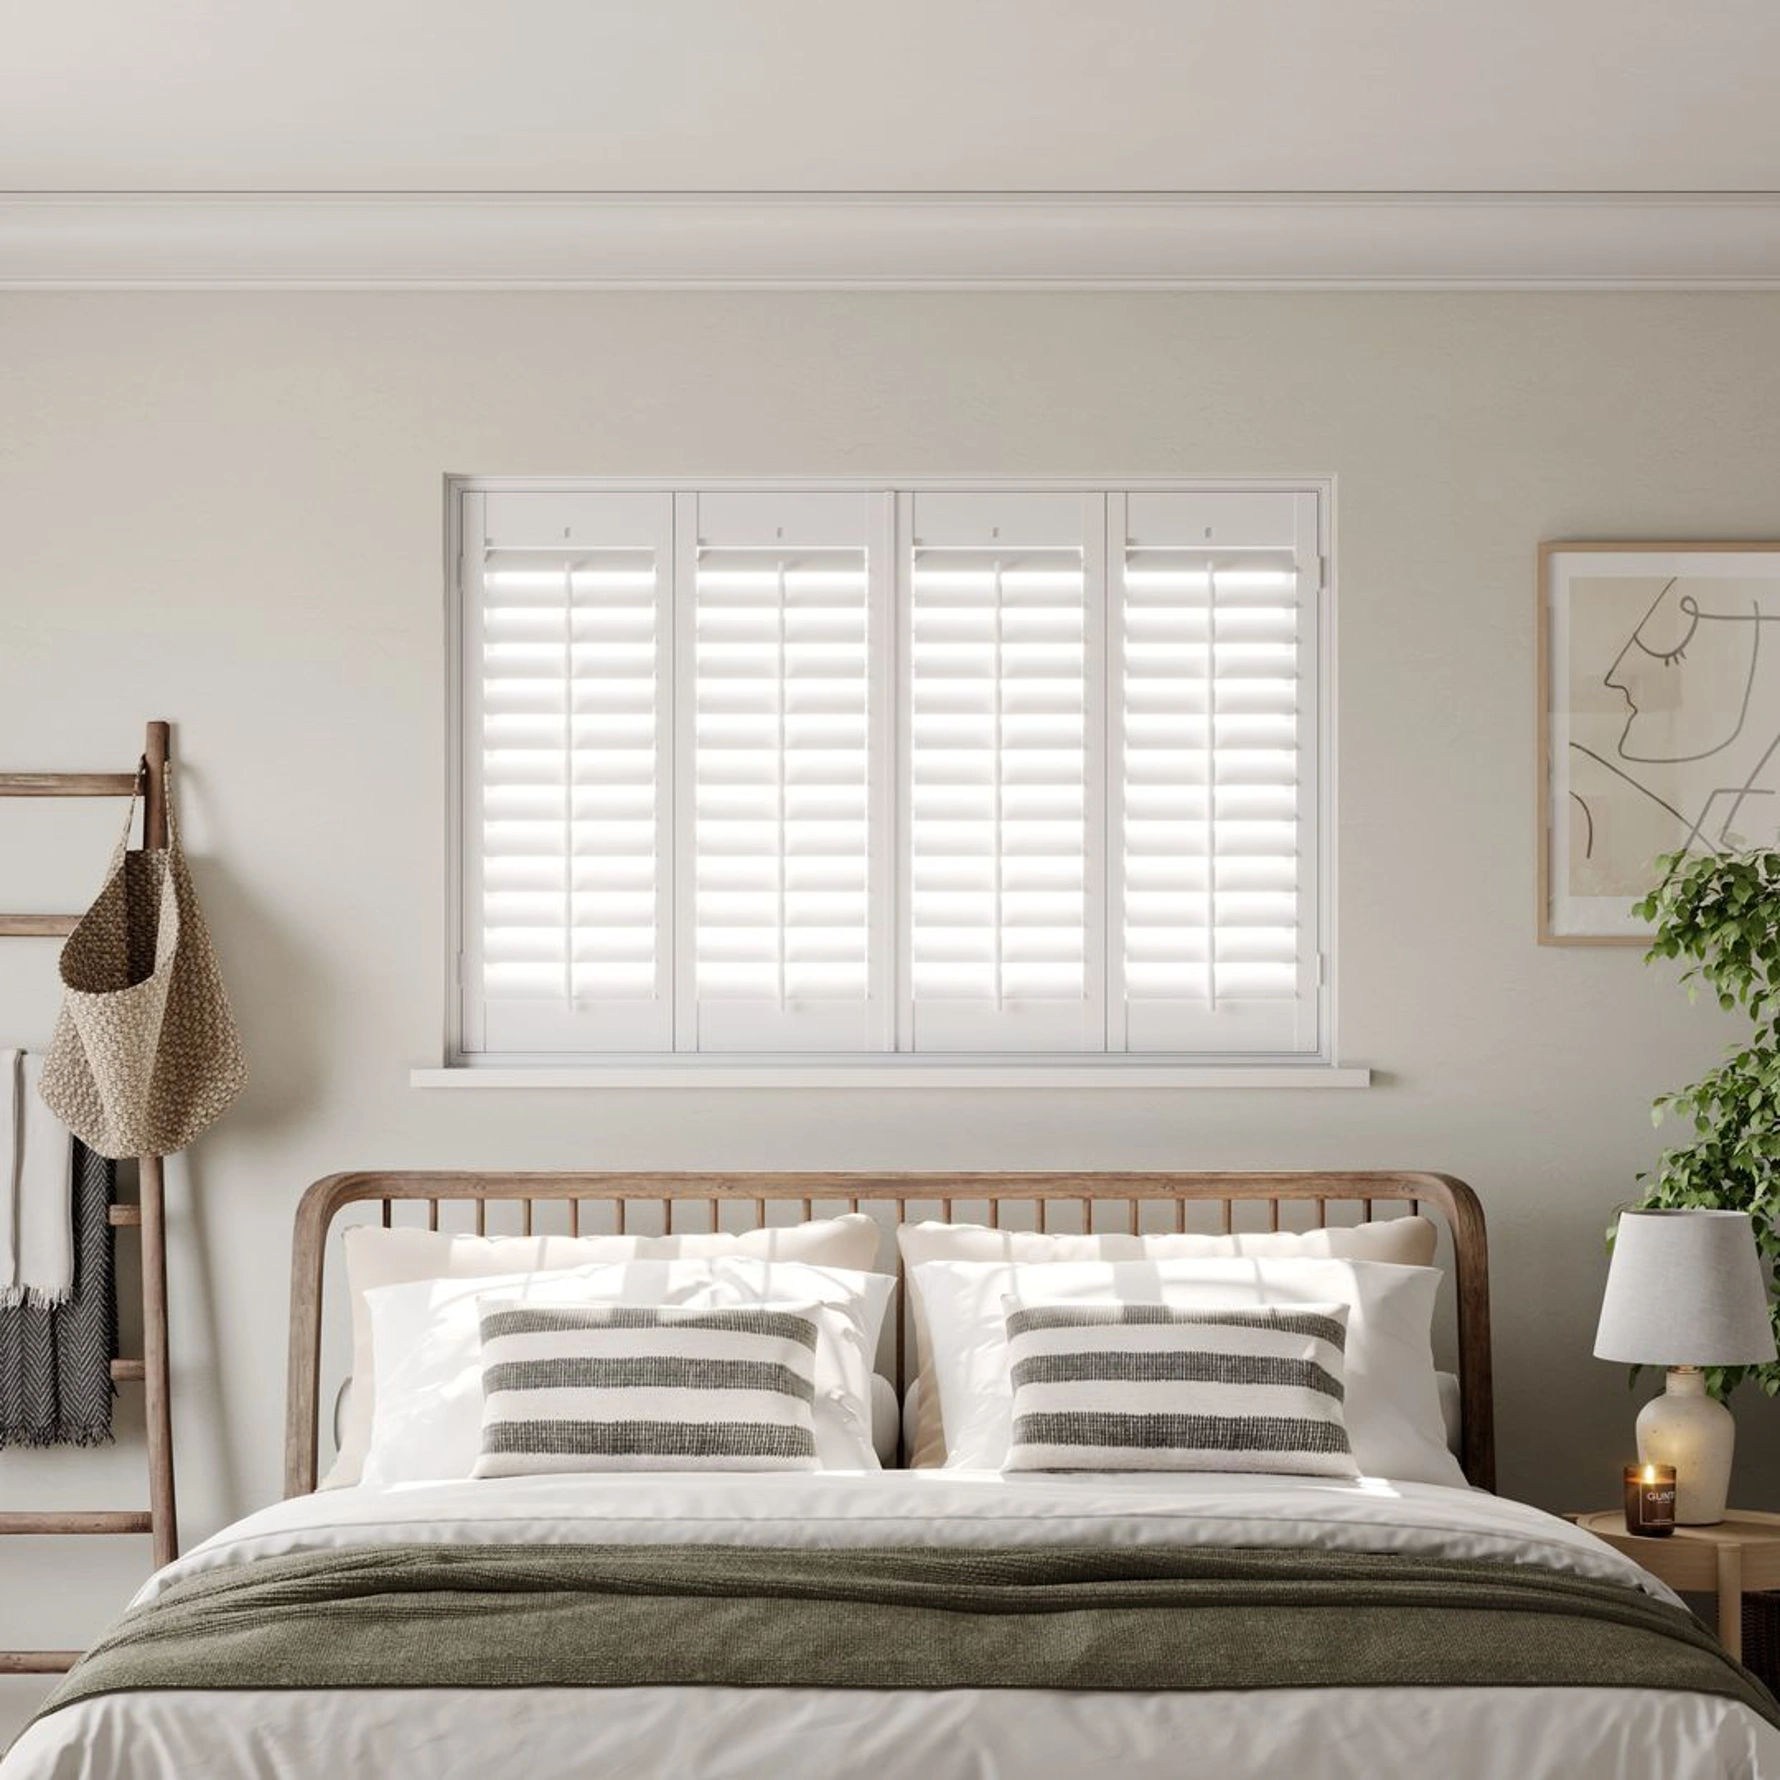 A modern neutral bedroom with Vivid White full height wooden shutters